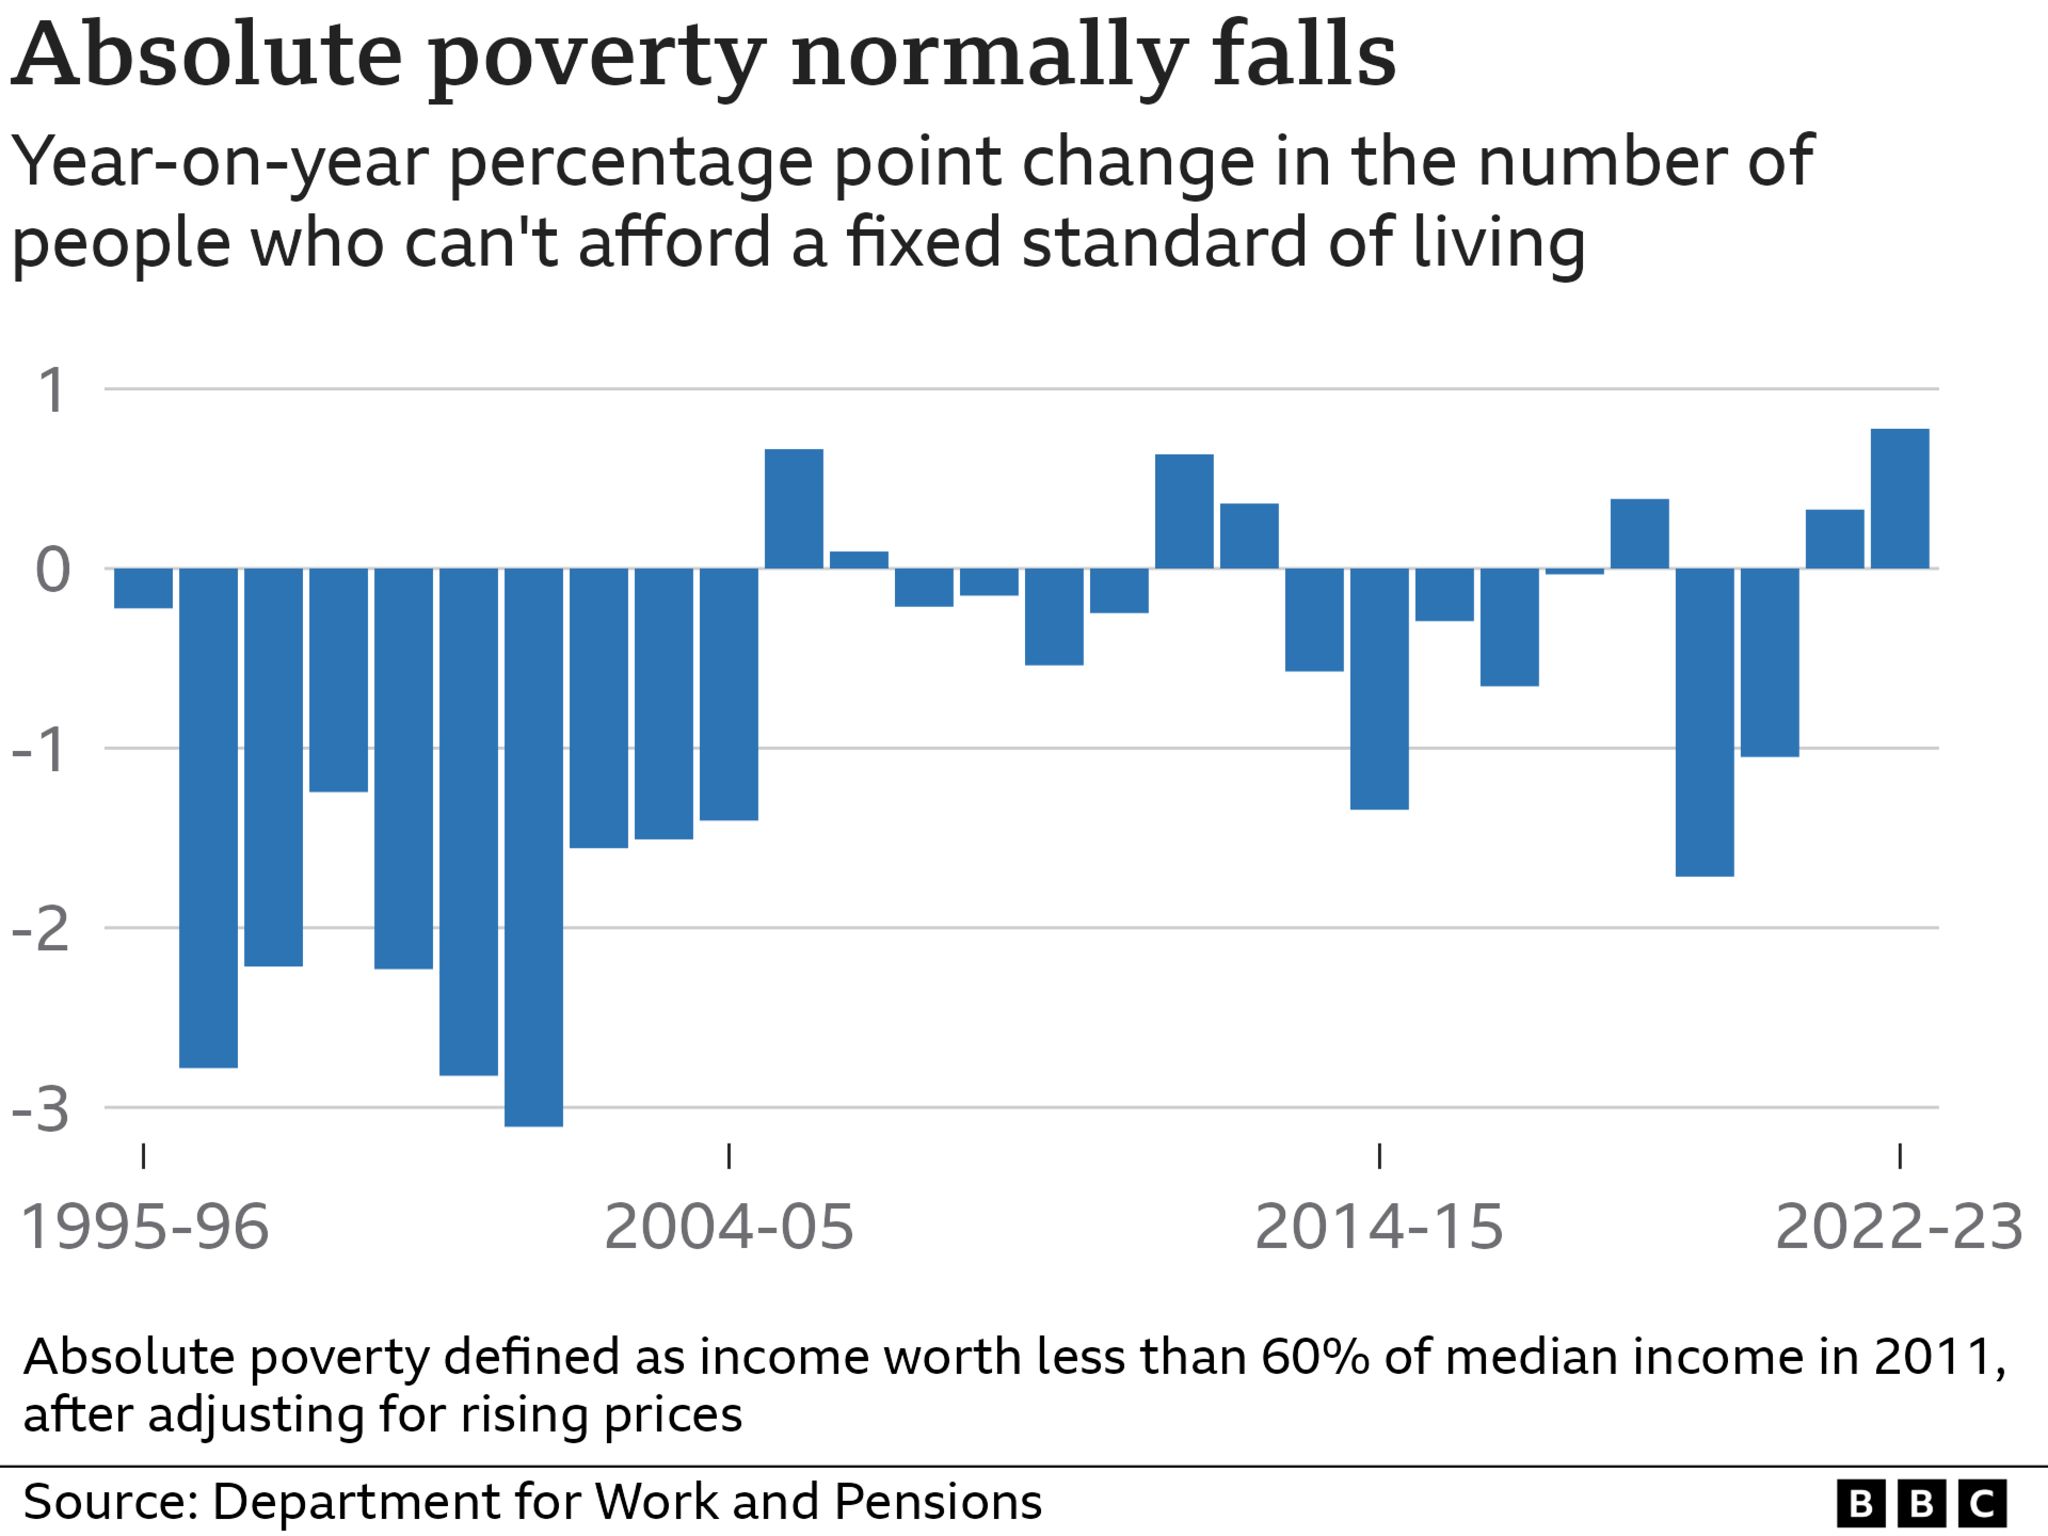 A bar chart showing the annual rise and fall in absolutely poverty since 1995-1996. It shows a sharp percentage rise in 2022-23 compared with recent years.